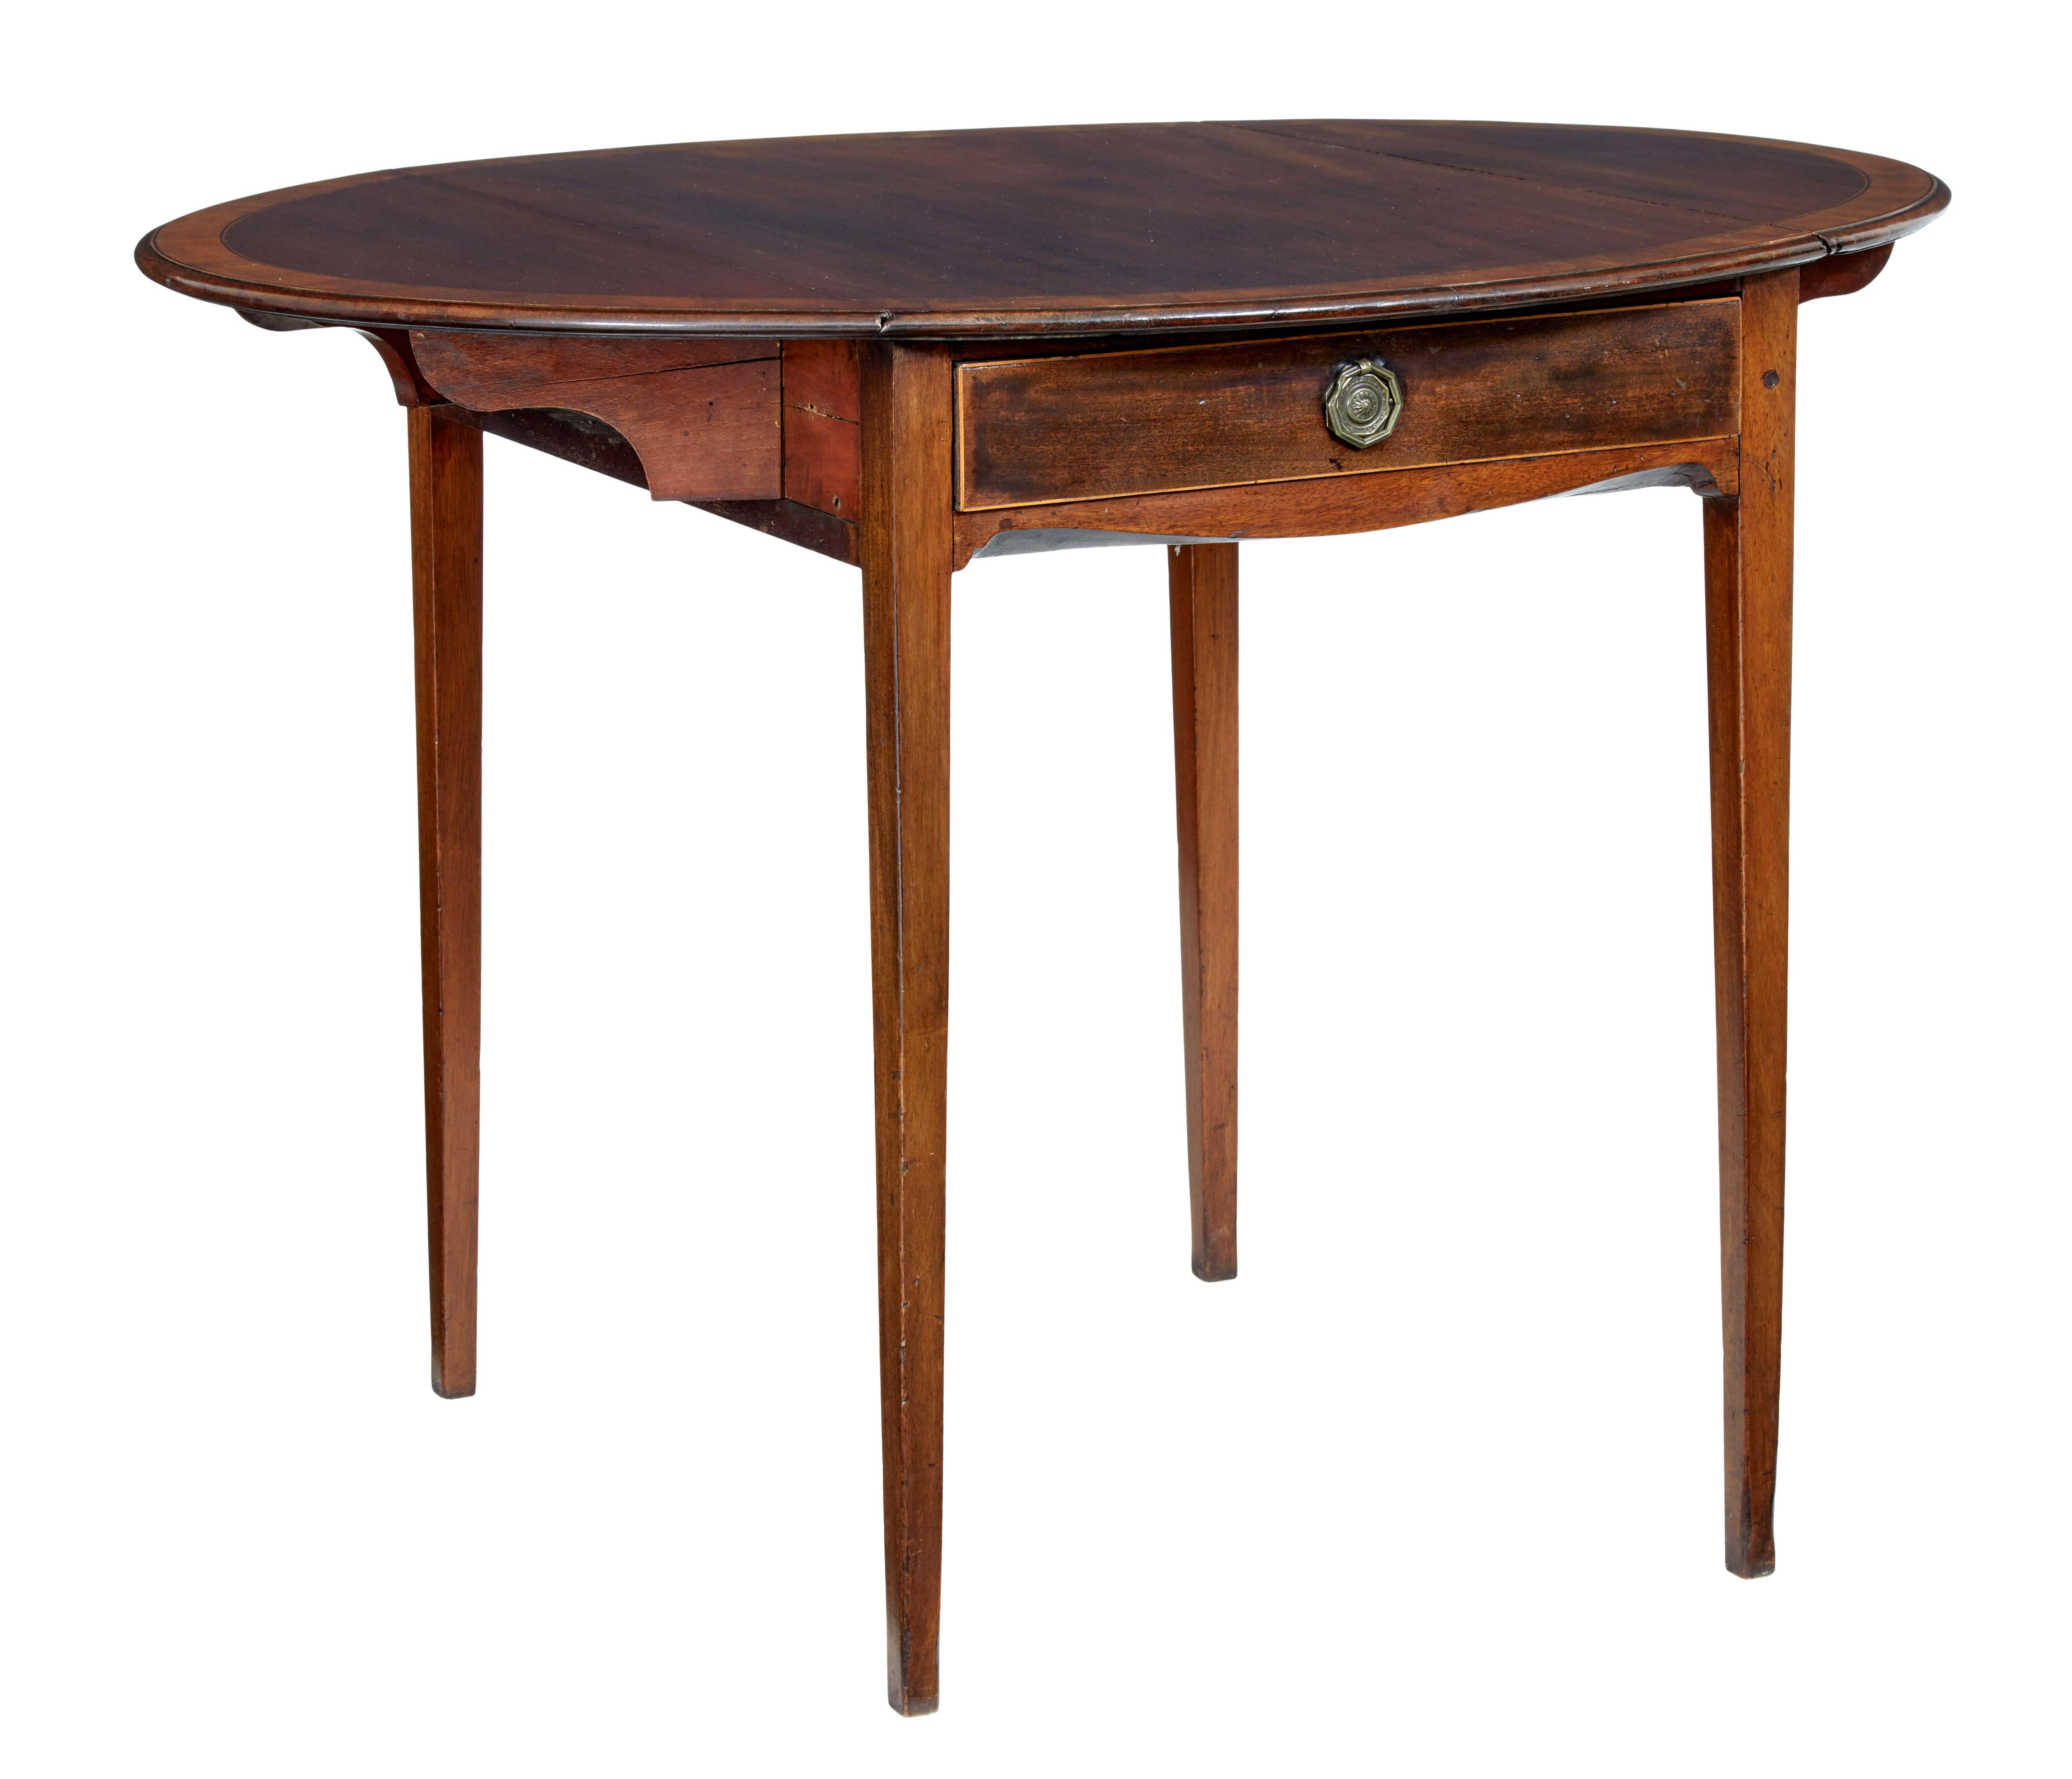 A fine cross banded pembroke table, circa 1825.

Drop leaves open to form a near circular top, mahogany top cross banded and with ebony stringing.

Single drawer to the front with original handle, standing on slight tapered legs.

Minor surface